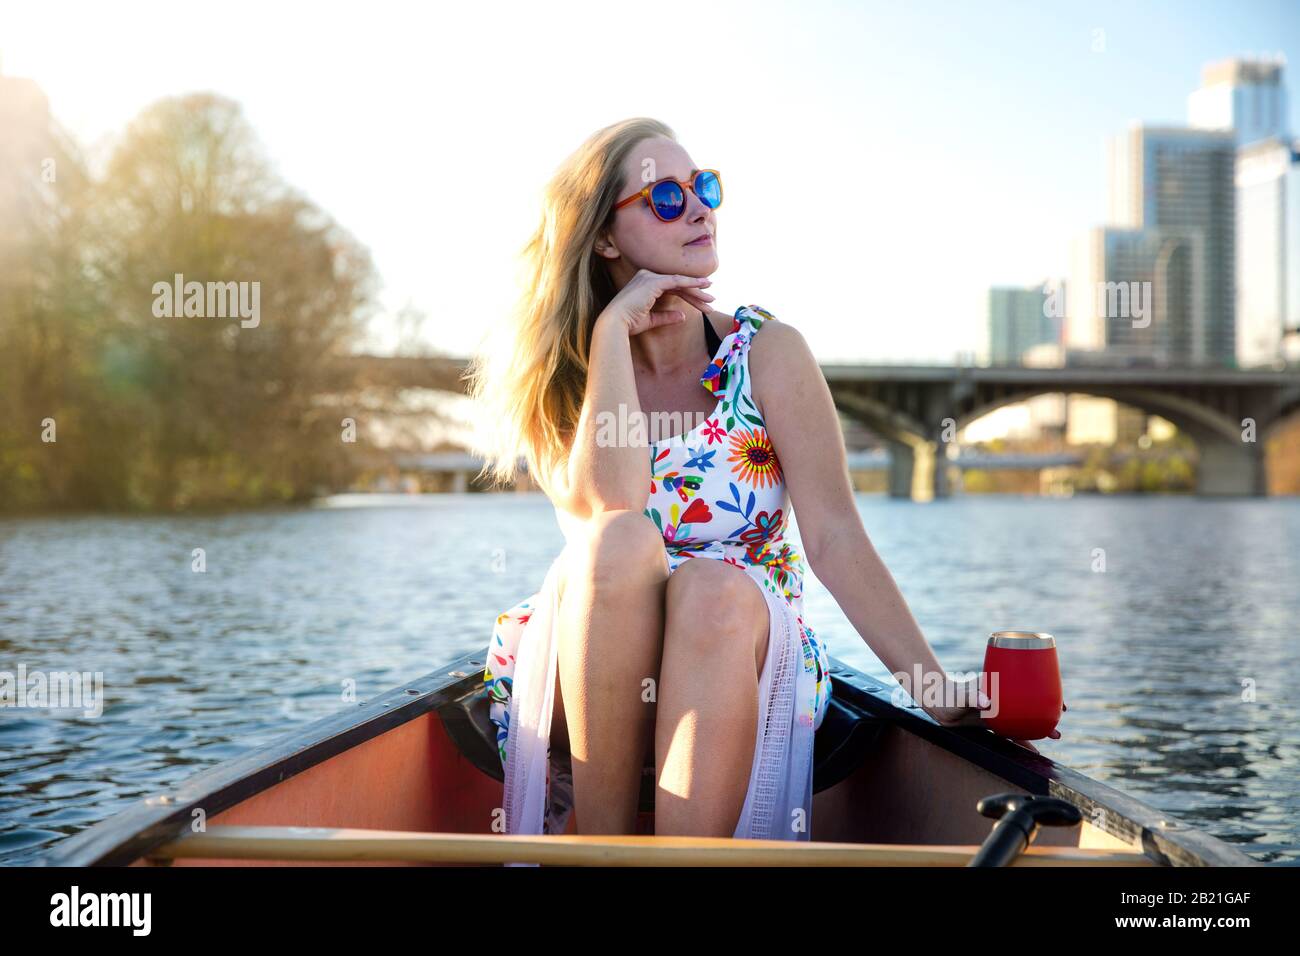 Pretty commercial model in boat, leisure summer activity city lifestyle, outdoors, enjoying life Stock Photo